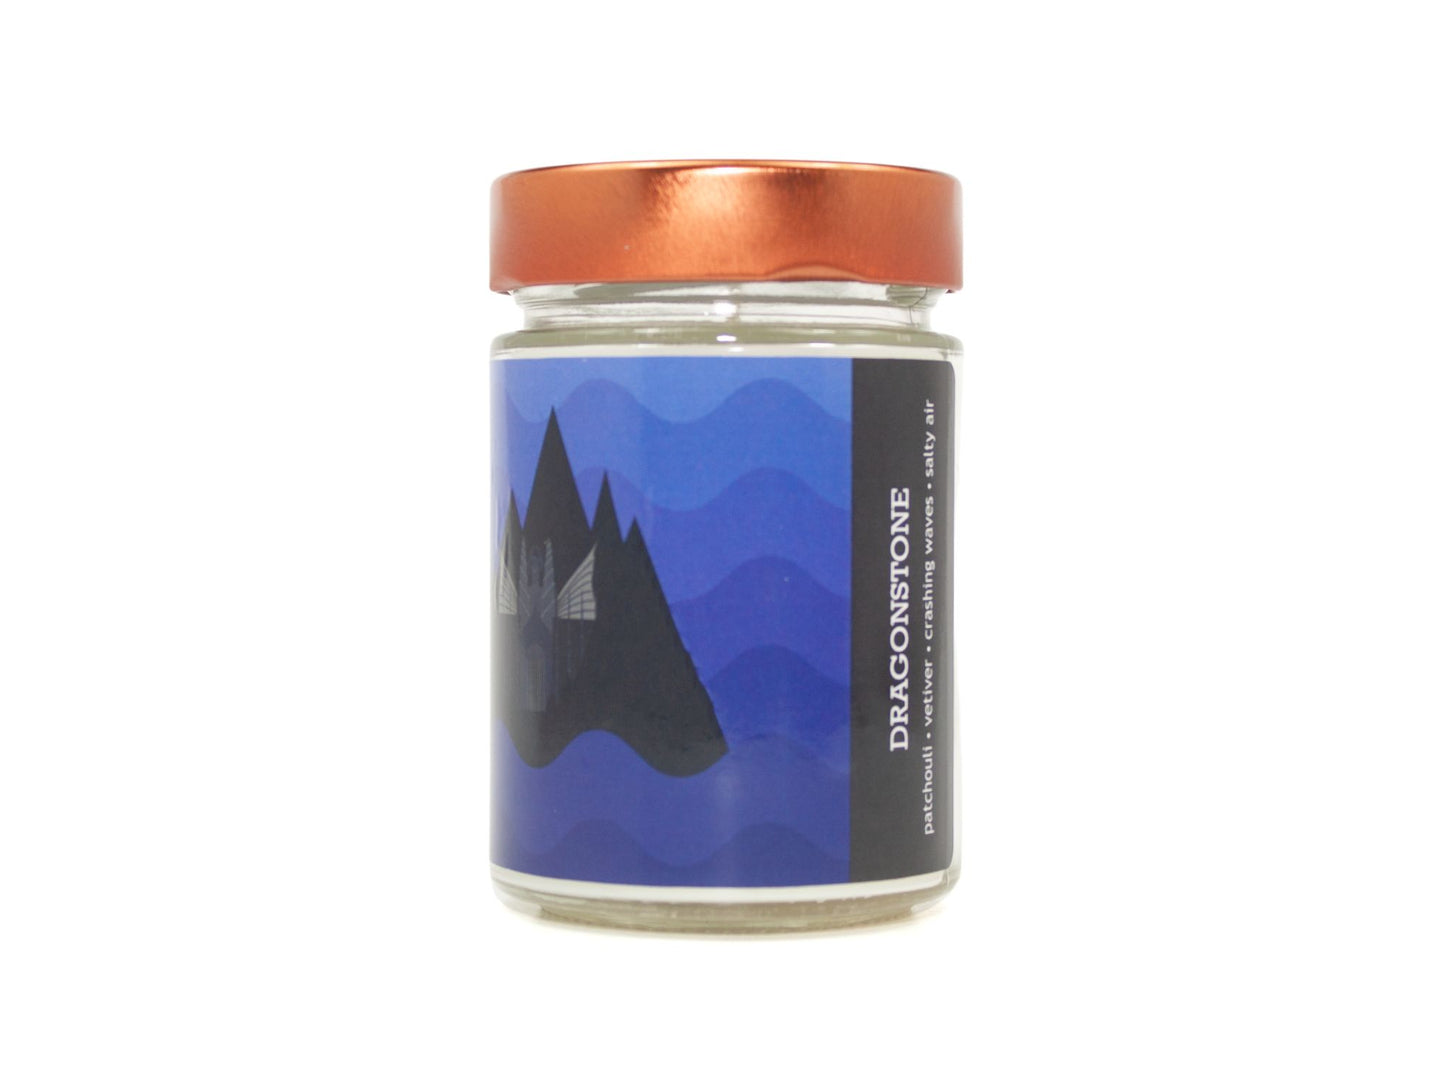 Onset & Rime chilly island scented candle called "Dragonstone" in a 10 oz glass jar with copper lid. The label has blue waves in the background with a volcanic island and castle. The text on the label is "Dragonstone - Patchouli, Vetiver, Crashing Waves, Salty Air".